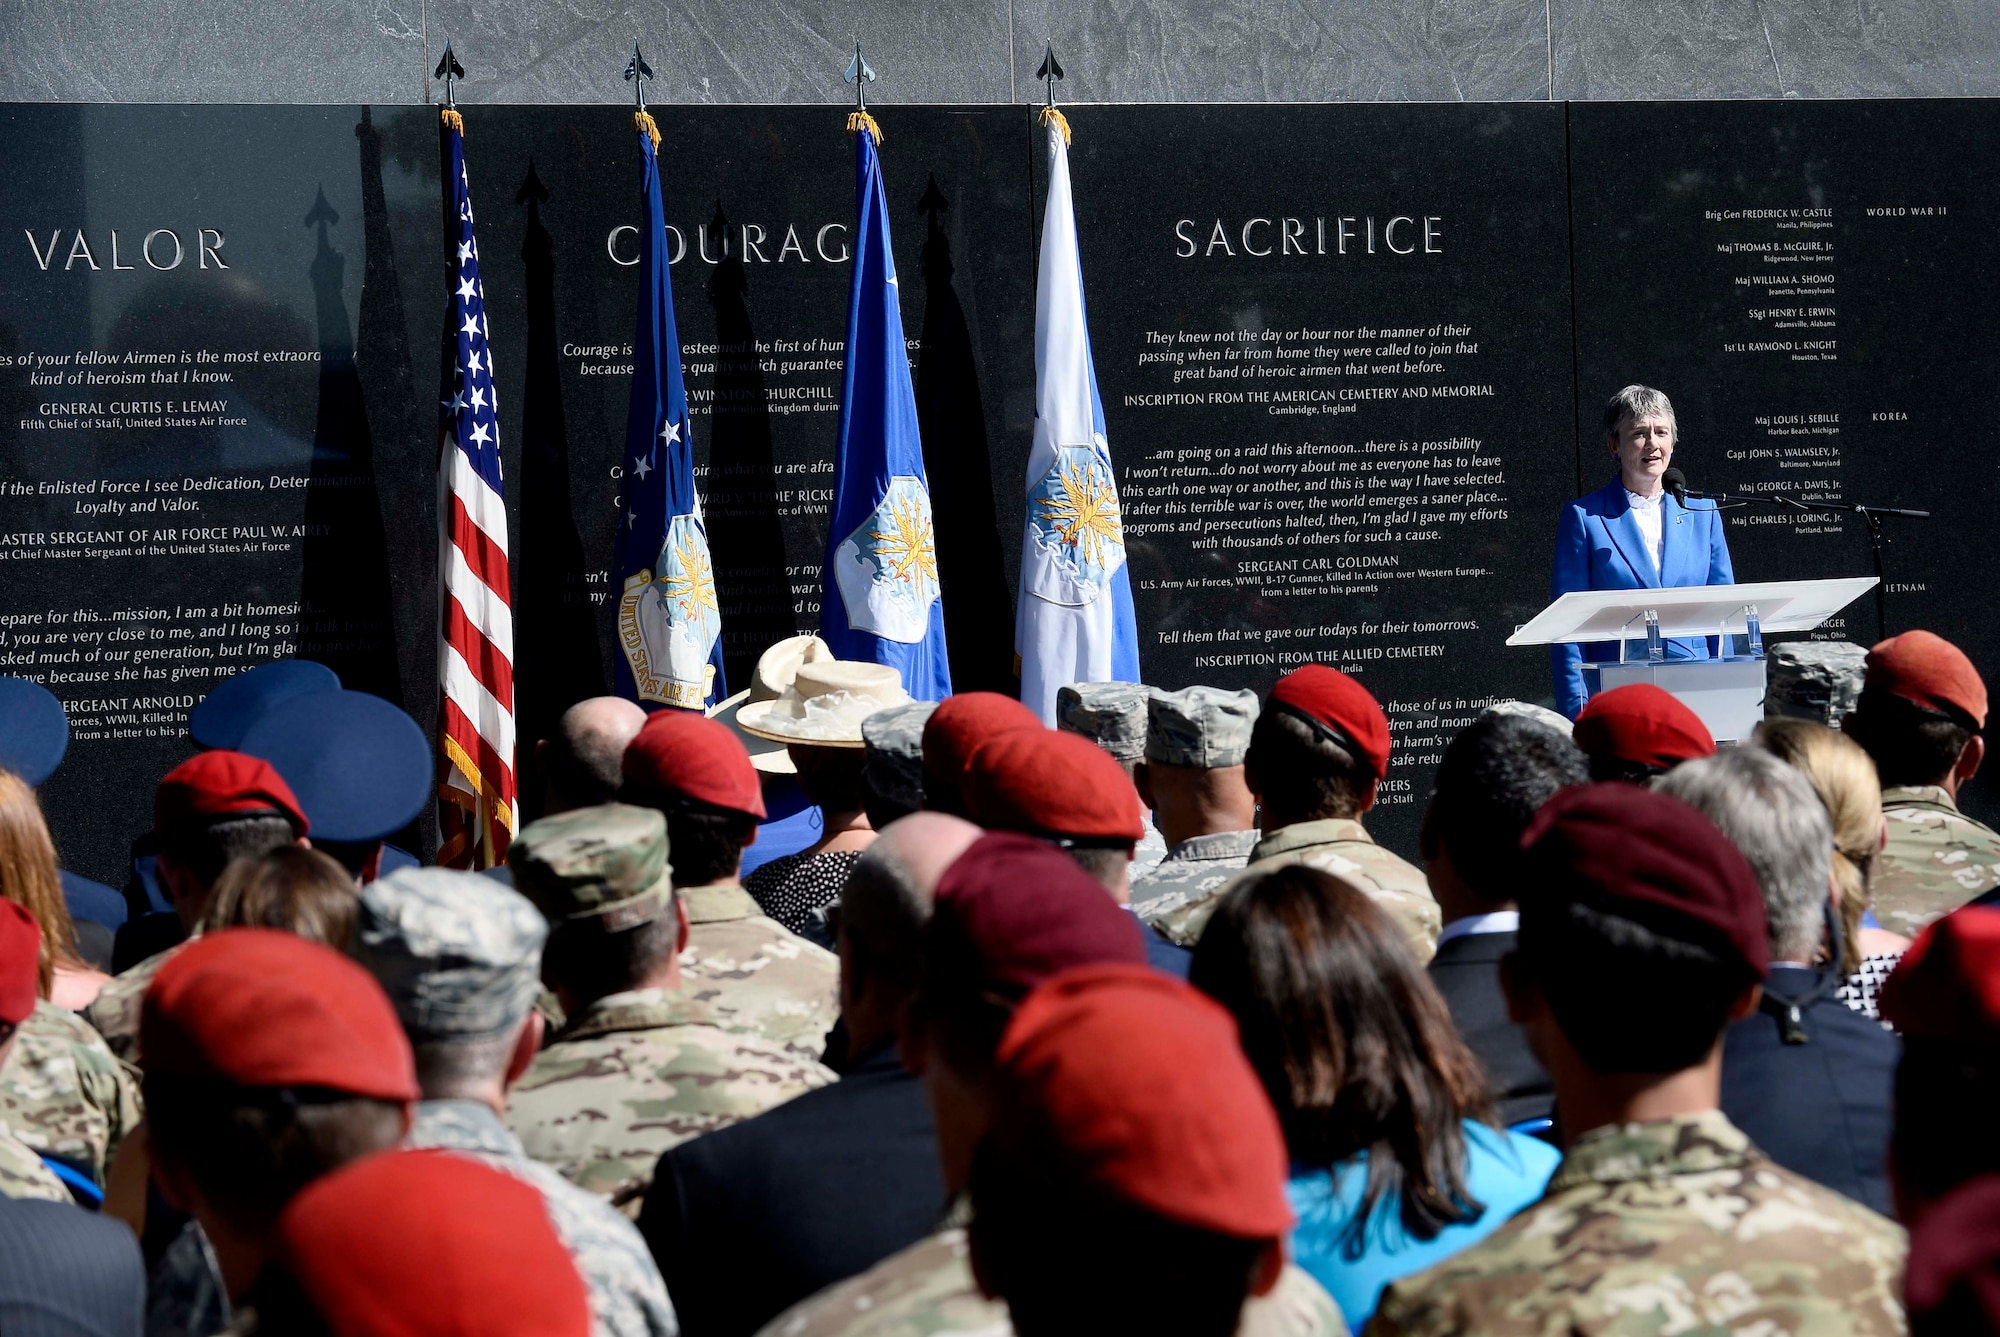 Secretary of the Air Force Heather Wilson speaks at Master. Sgt. John Chapman’s name unveiling ceremony at the Air Force Memorial in Arlington, Va., Aug. 24, 2018. Chapman was posthumously awarded the Medal of Honor for actions on Takur Ghar Mountain in Afghanistan March 4, 2002. An elite special operations team was ambushed by the enemy and came under heavy fire from multiple directions. Chapman immediately charged an enemy bunker through thigh-deep snow and killed all enemy occupants. Courageously moving from cover to assault a second machine gun bunker, he was injured by enemy fire. Despite severe wounds, he fought relentlessly, sustaining a violent engagement with multiple enemy personnel before making the ultimate sacrifice. With his last actions he saved the lives of his teammates. (U.S. Air Force photo by Staff Sgt. Chad Trujillo)